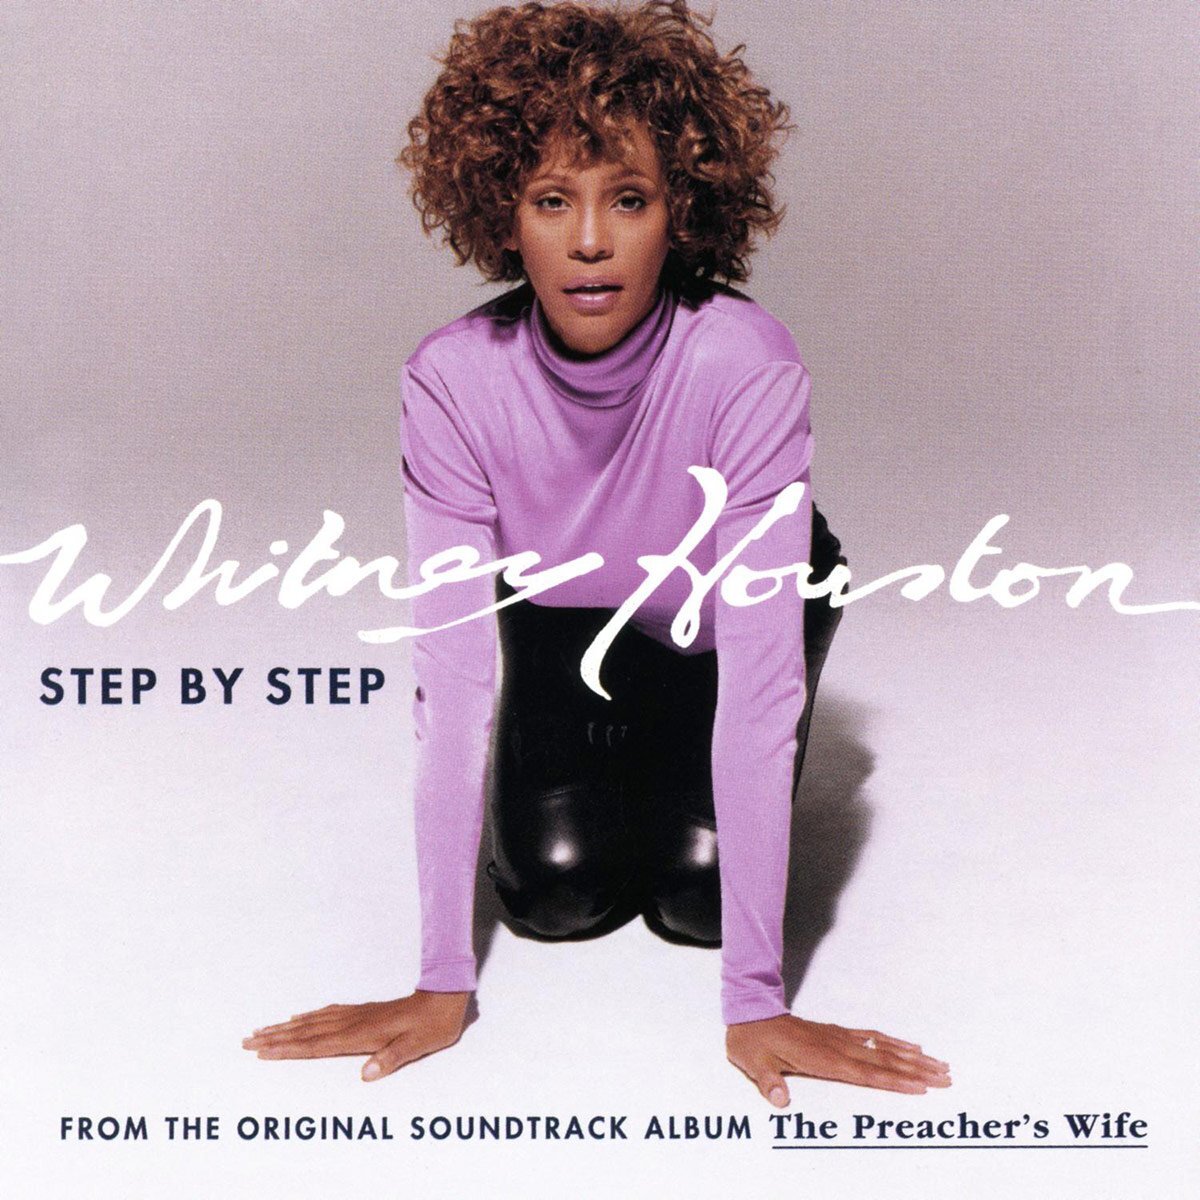 <p>Without question, Whitney Houston was the queen of the movie soundtrack. On top of <em>The Bodyguard, </em>she also worked on the soundtrack for <a href="https://www.mtv.com/news/ewfcgo/whitney-houston-dead-movie-sountracks">numerous movies</a> including <em>The Prince of Egypt, Waiting to Exhale </em>and <em>The Preacher’s Wife</em>, which she starred in alongside Denzel Washington. <a href="https://www.youtube.com/watch?v=sWa5vE4MUpU">“Step by Step”</a> is a standout track from <em>The Preacher’s Wife</em> soundtrack, and served as an example of how great music can take a movie to new heights.</p>